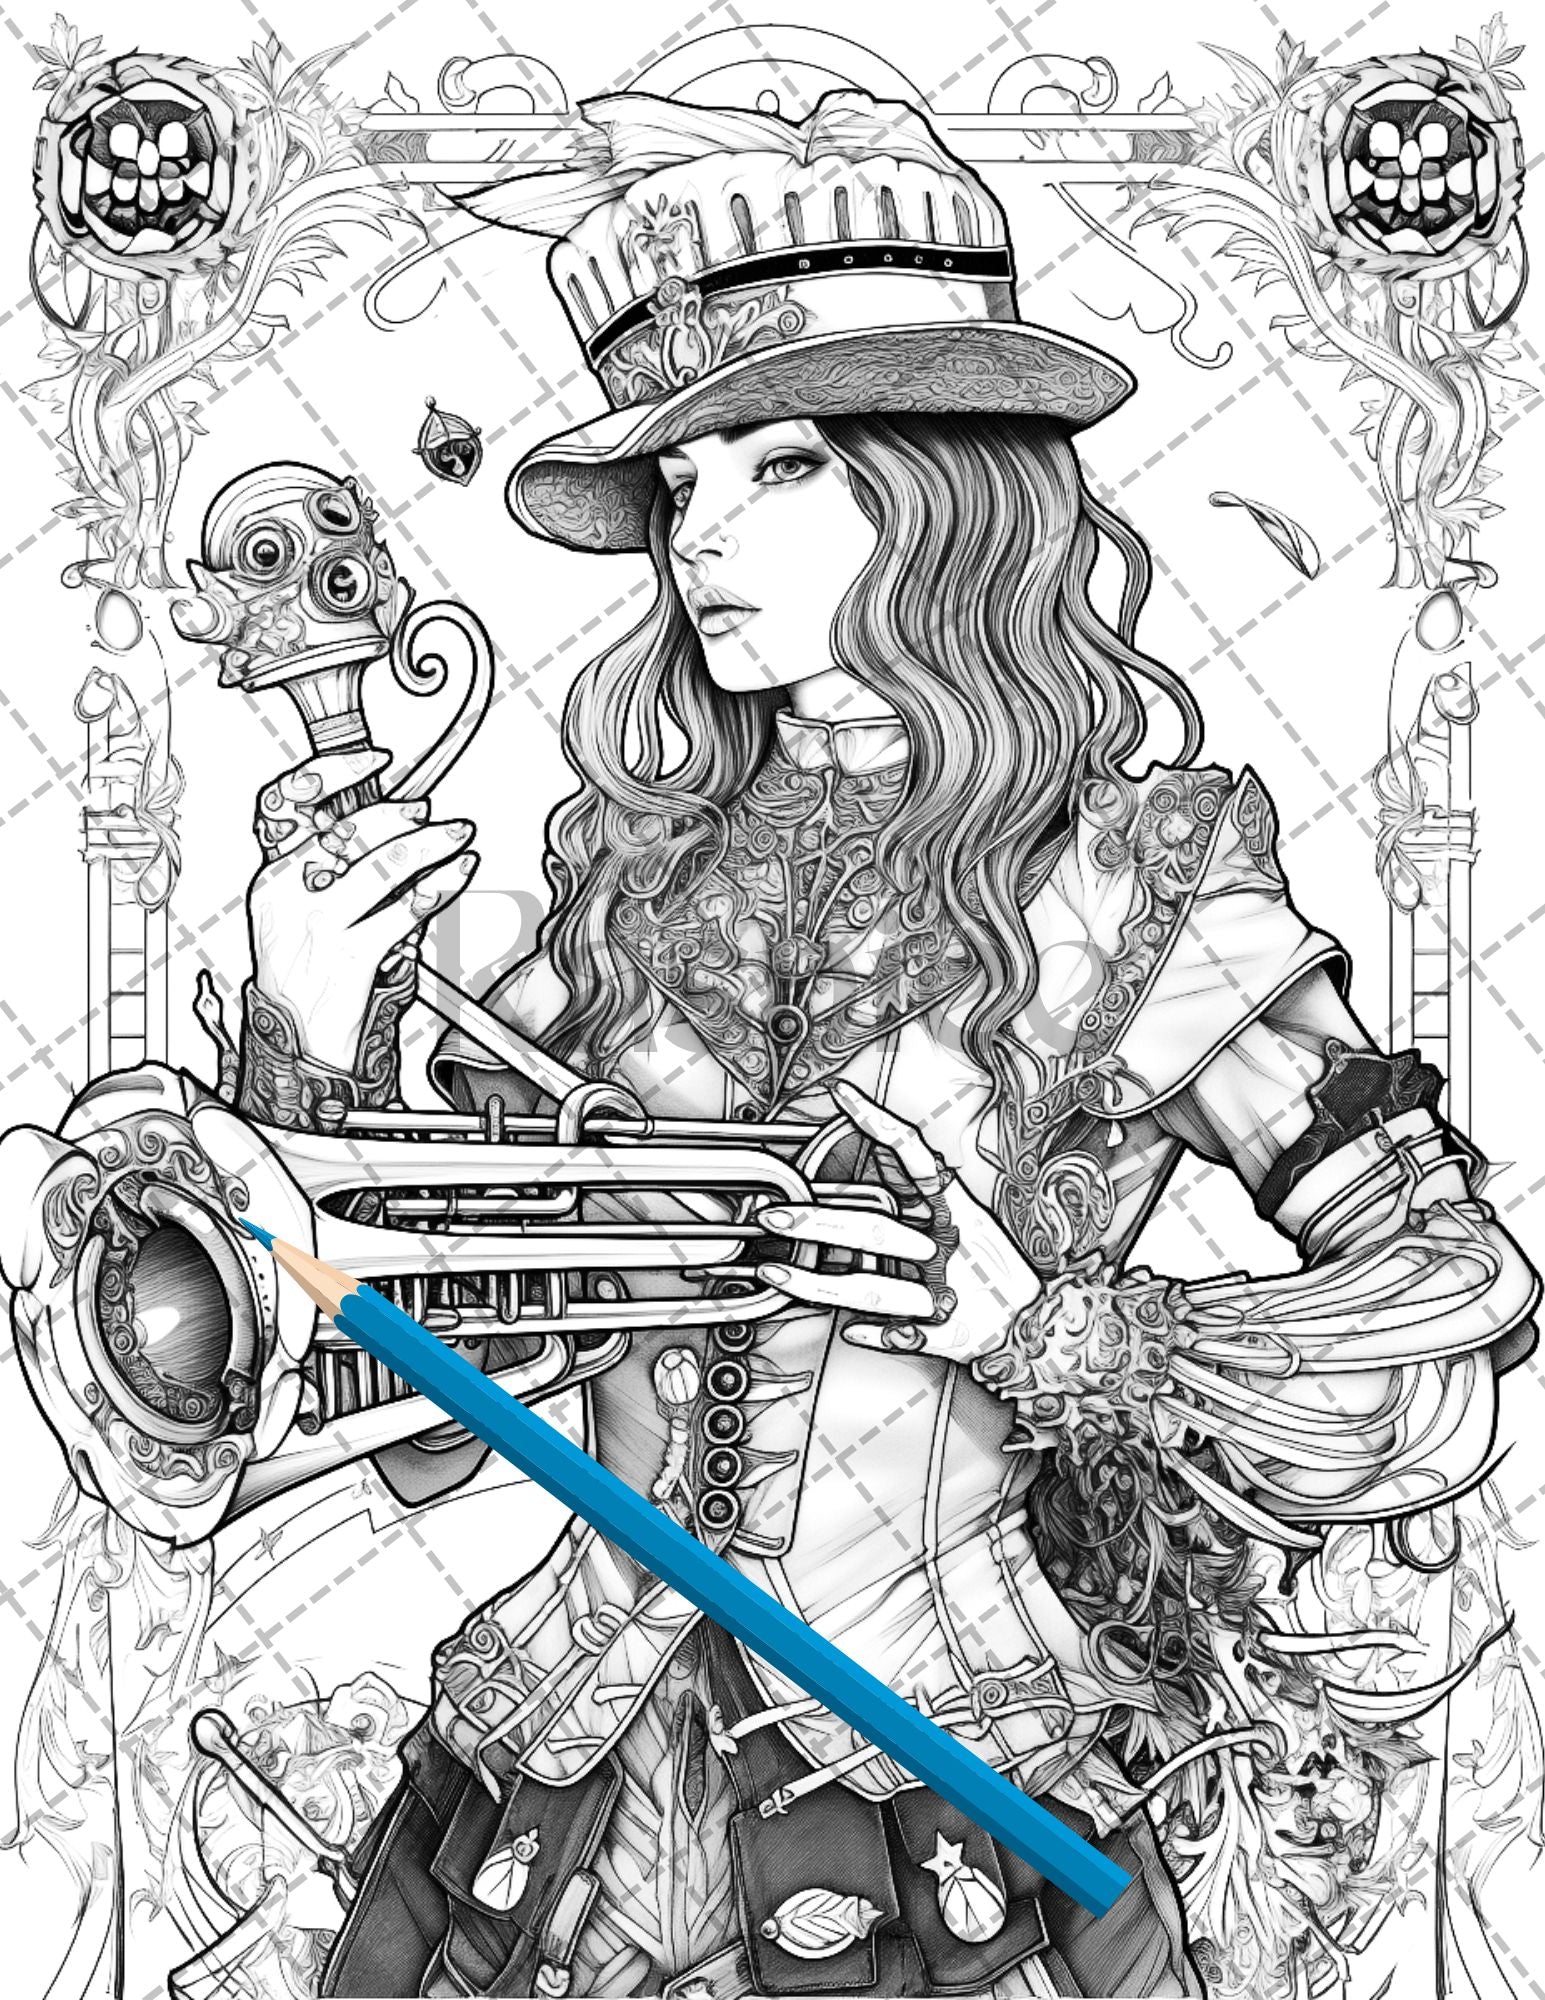 30 Steampunk Girls Coloring Pages Printable for Adults, Victorian Inspired Adult Grayscale Coloring Book, PDF File Download - raspiee